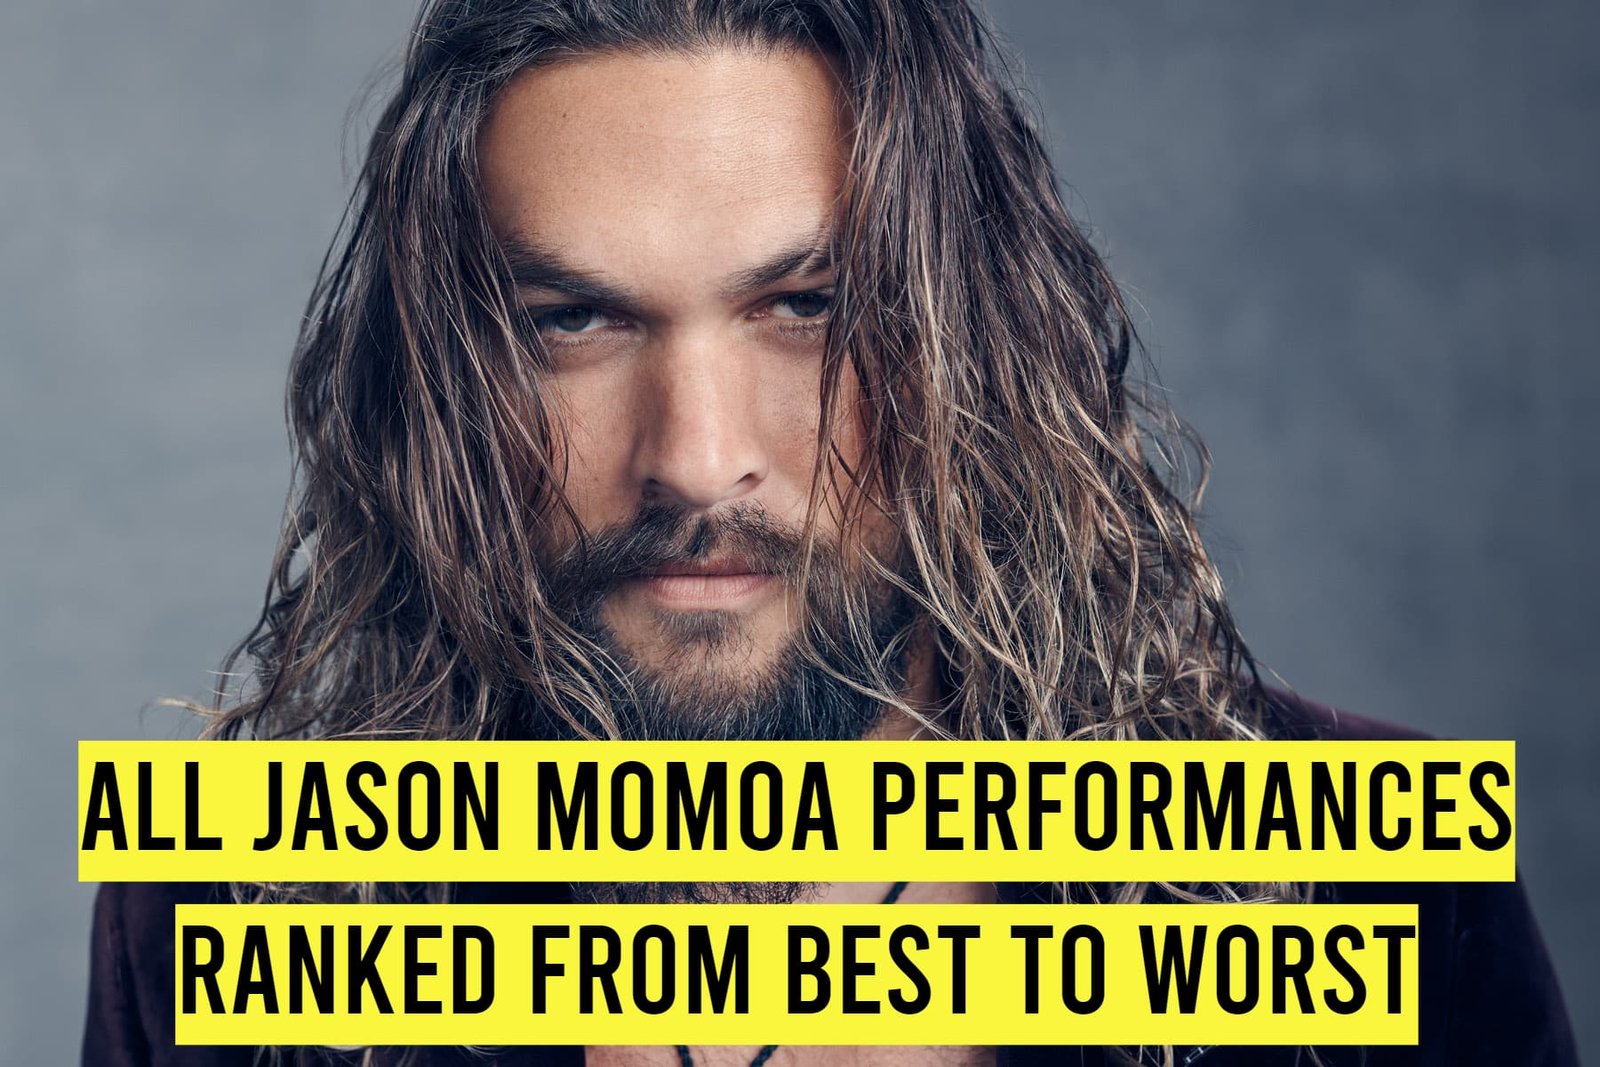 All Jason Momoa Performances Ranked From Best to Worst